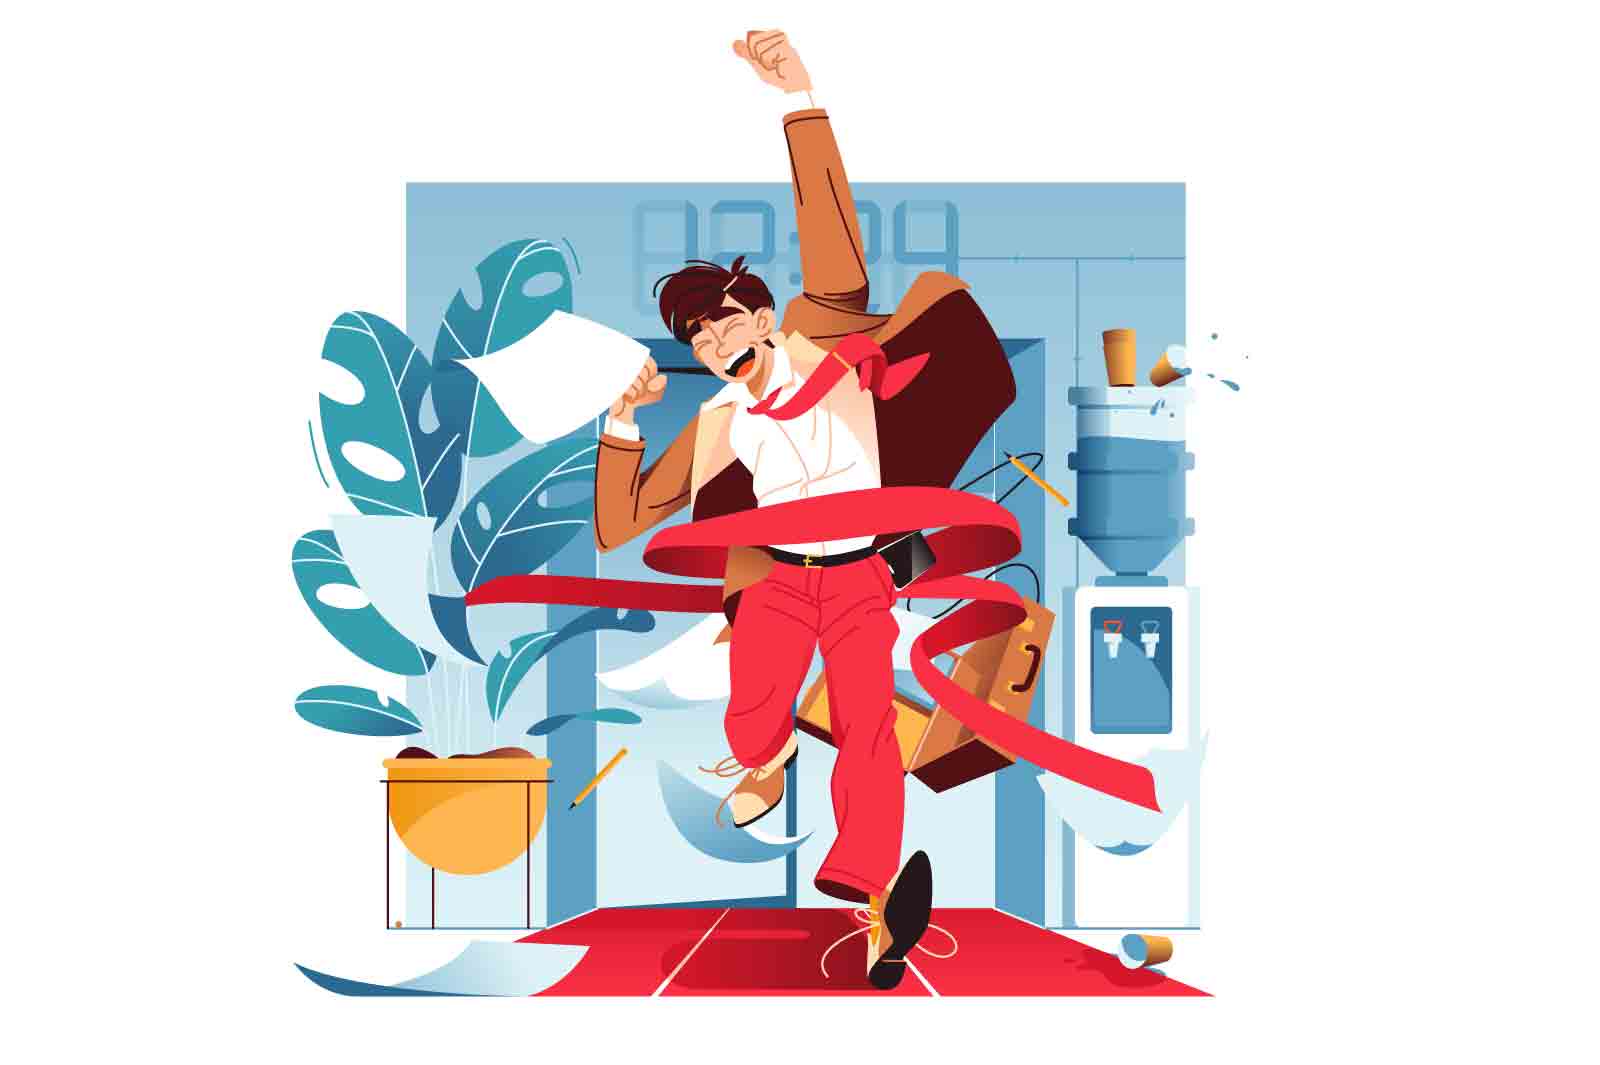 Office worker races down corridor crossing finish line, vector illustration. Businessman triumphantly waving document and dropping papers in excitement. Finishing first symbolizes success.